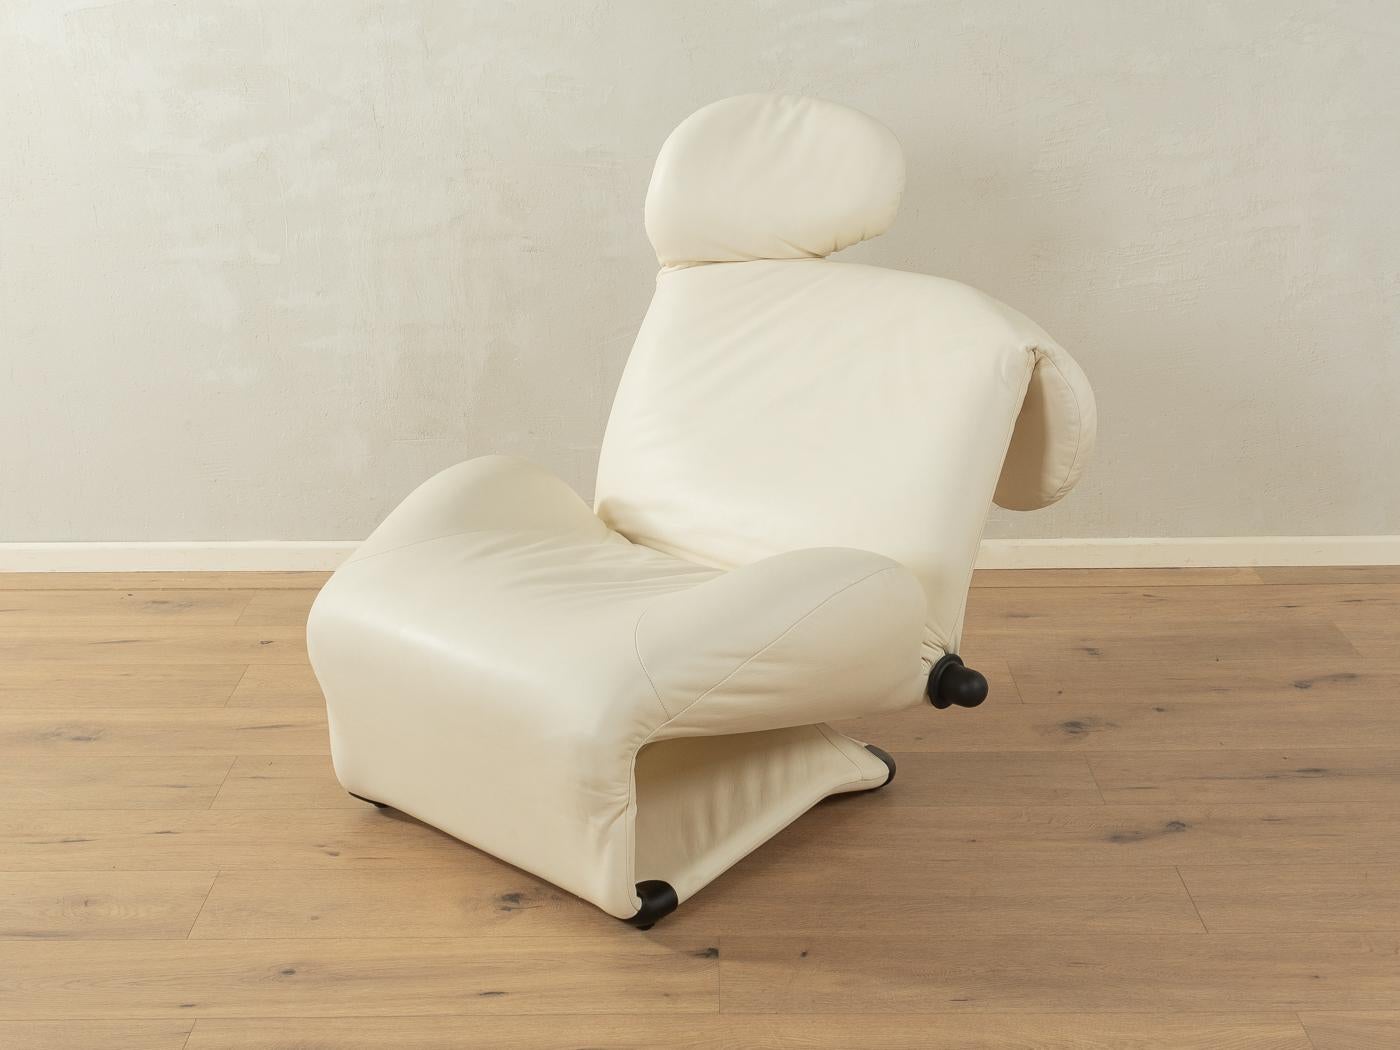 Extraordinary WINK armchair by Toshiyuki Kita for Cassina with the high-quality original leather cover in cream white. The versatile armchair takes different positions at the touch of a button and can be converted from an armchair into a chaise